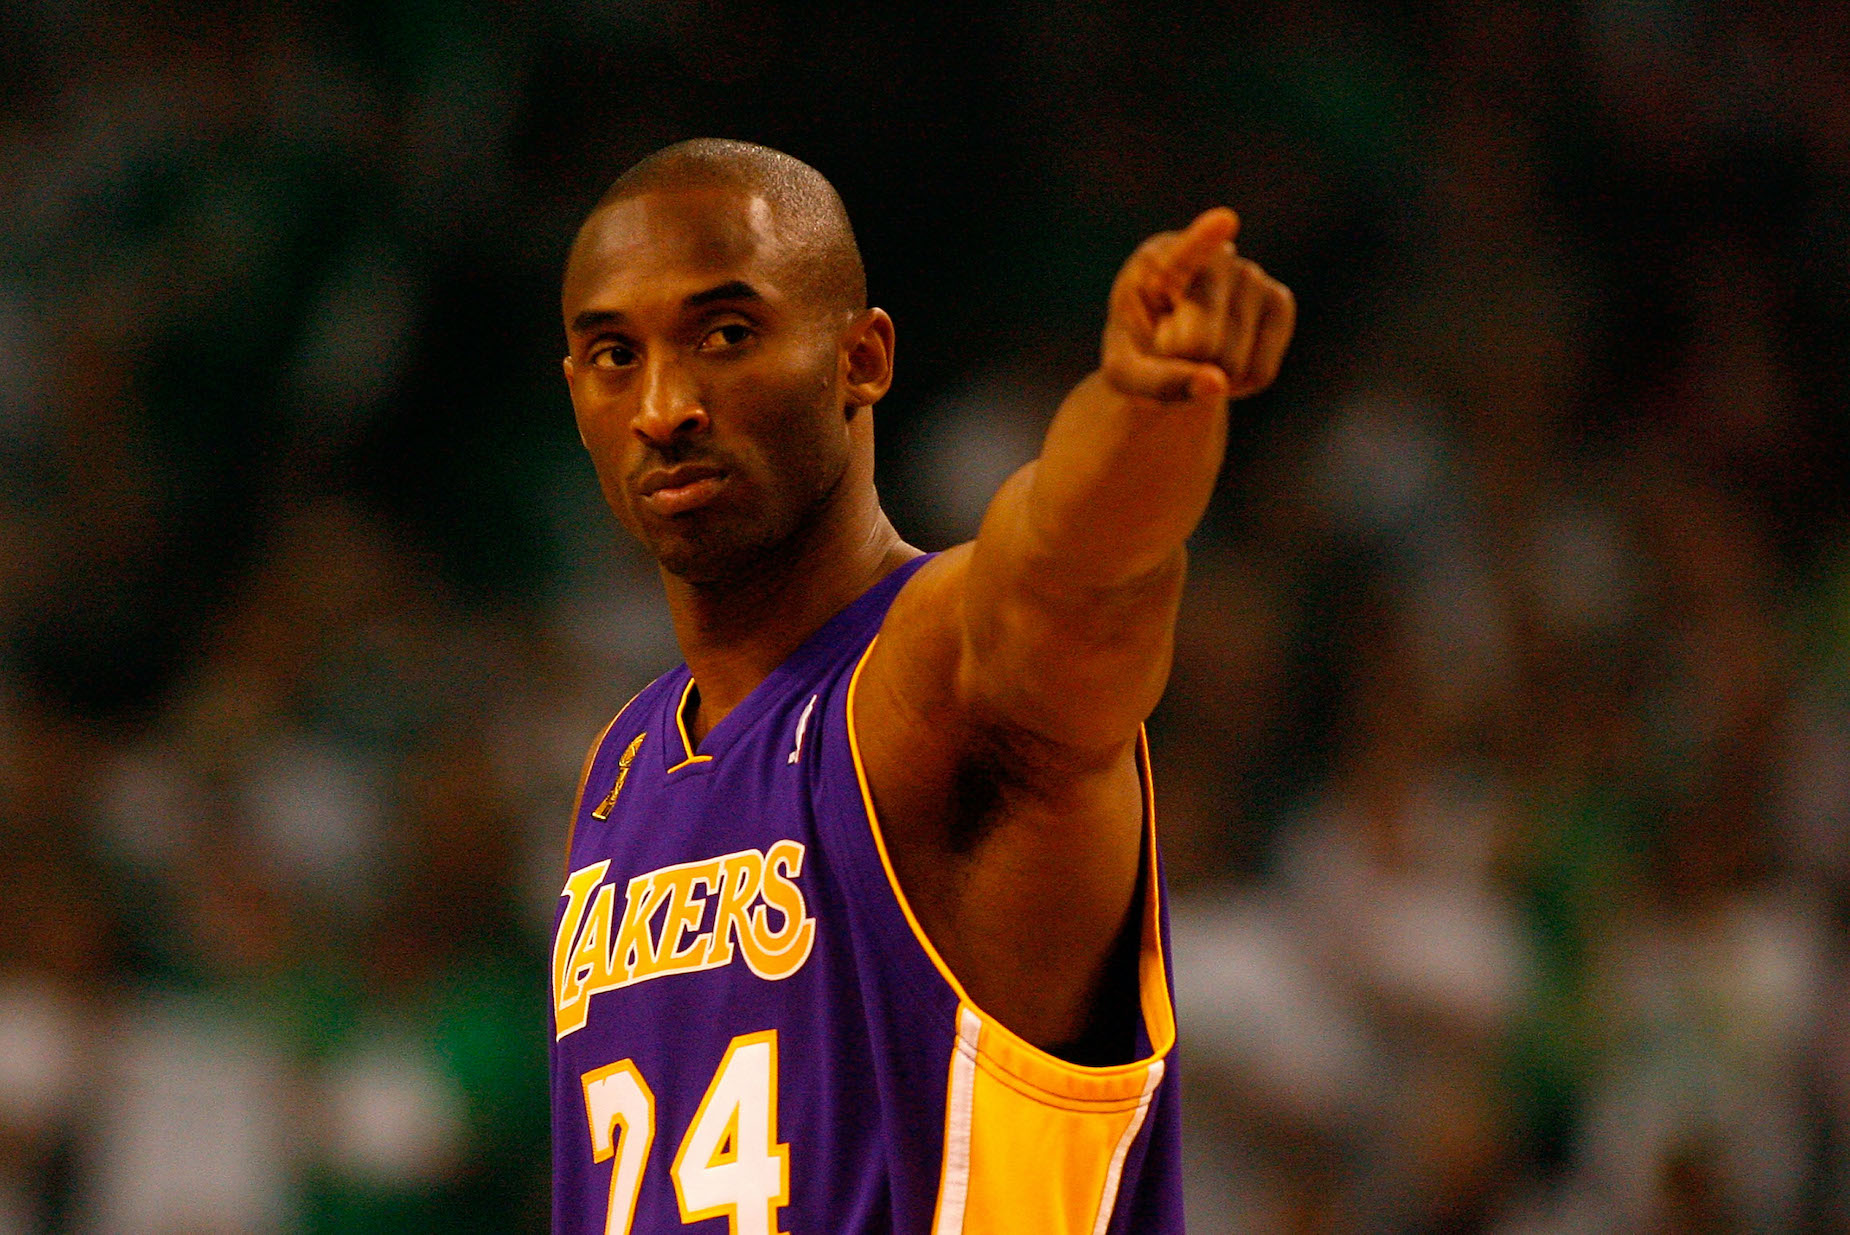 LA Lakers legend Kobe Bryant points during the 2008 NBA Finals